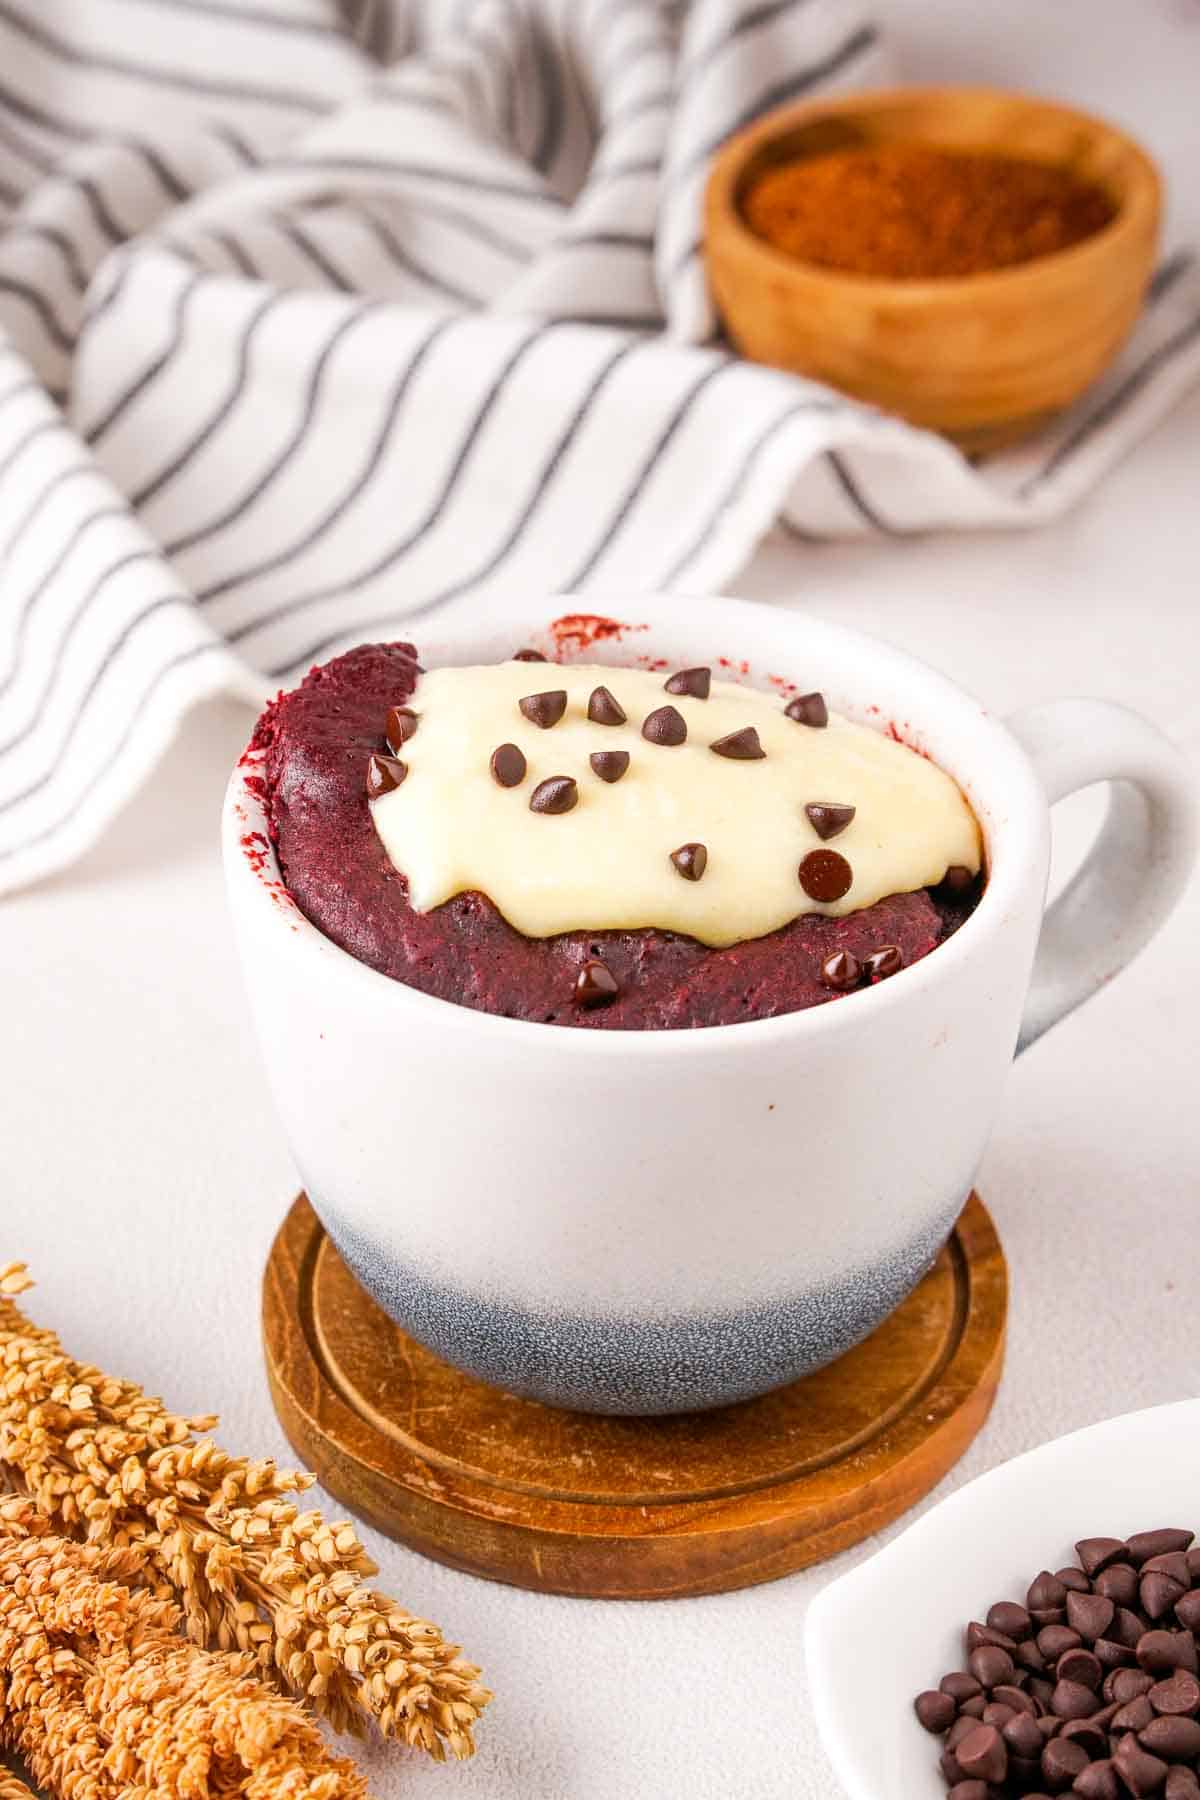 Red velvet cake in a mug on a wooden coaster. Chocolate chips are visible in the bottom corner of the photo.